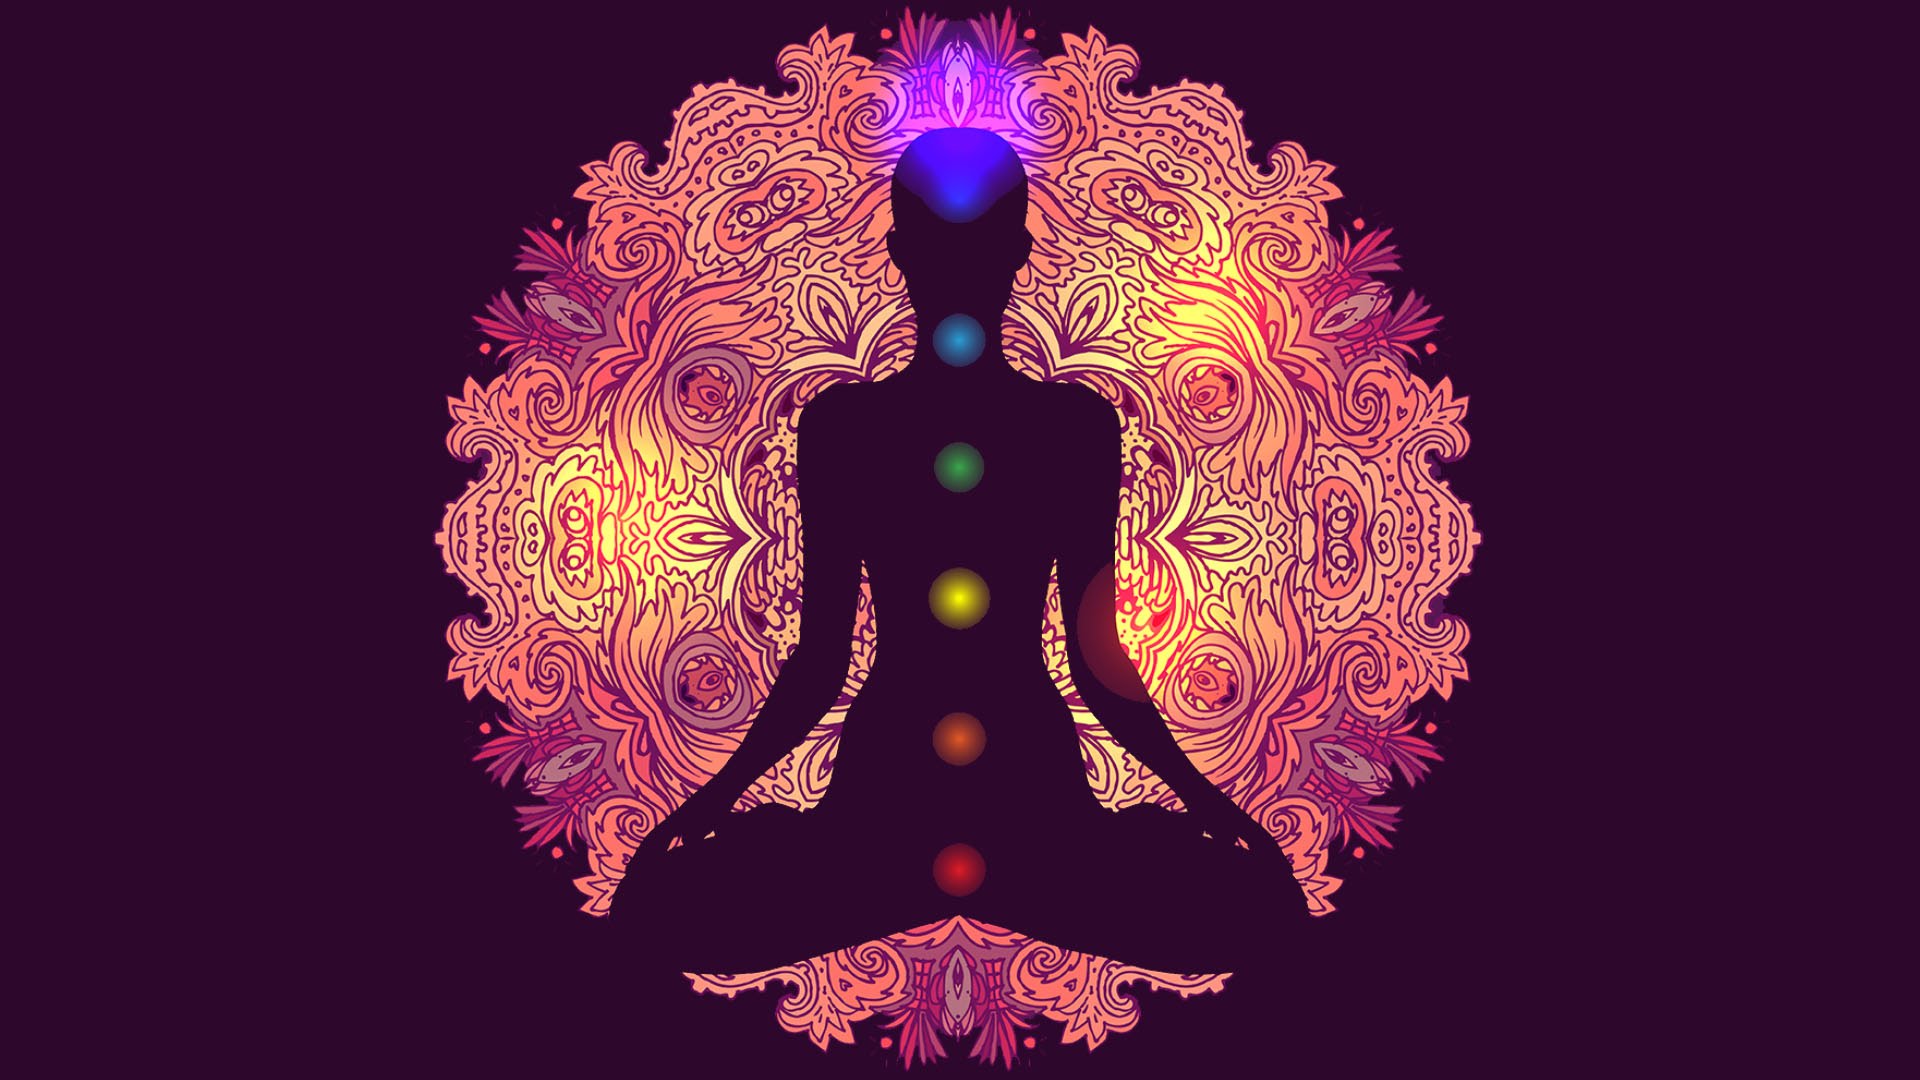 What are the uses of chakras in Buddhism? 4